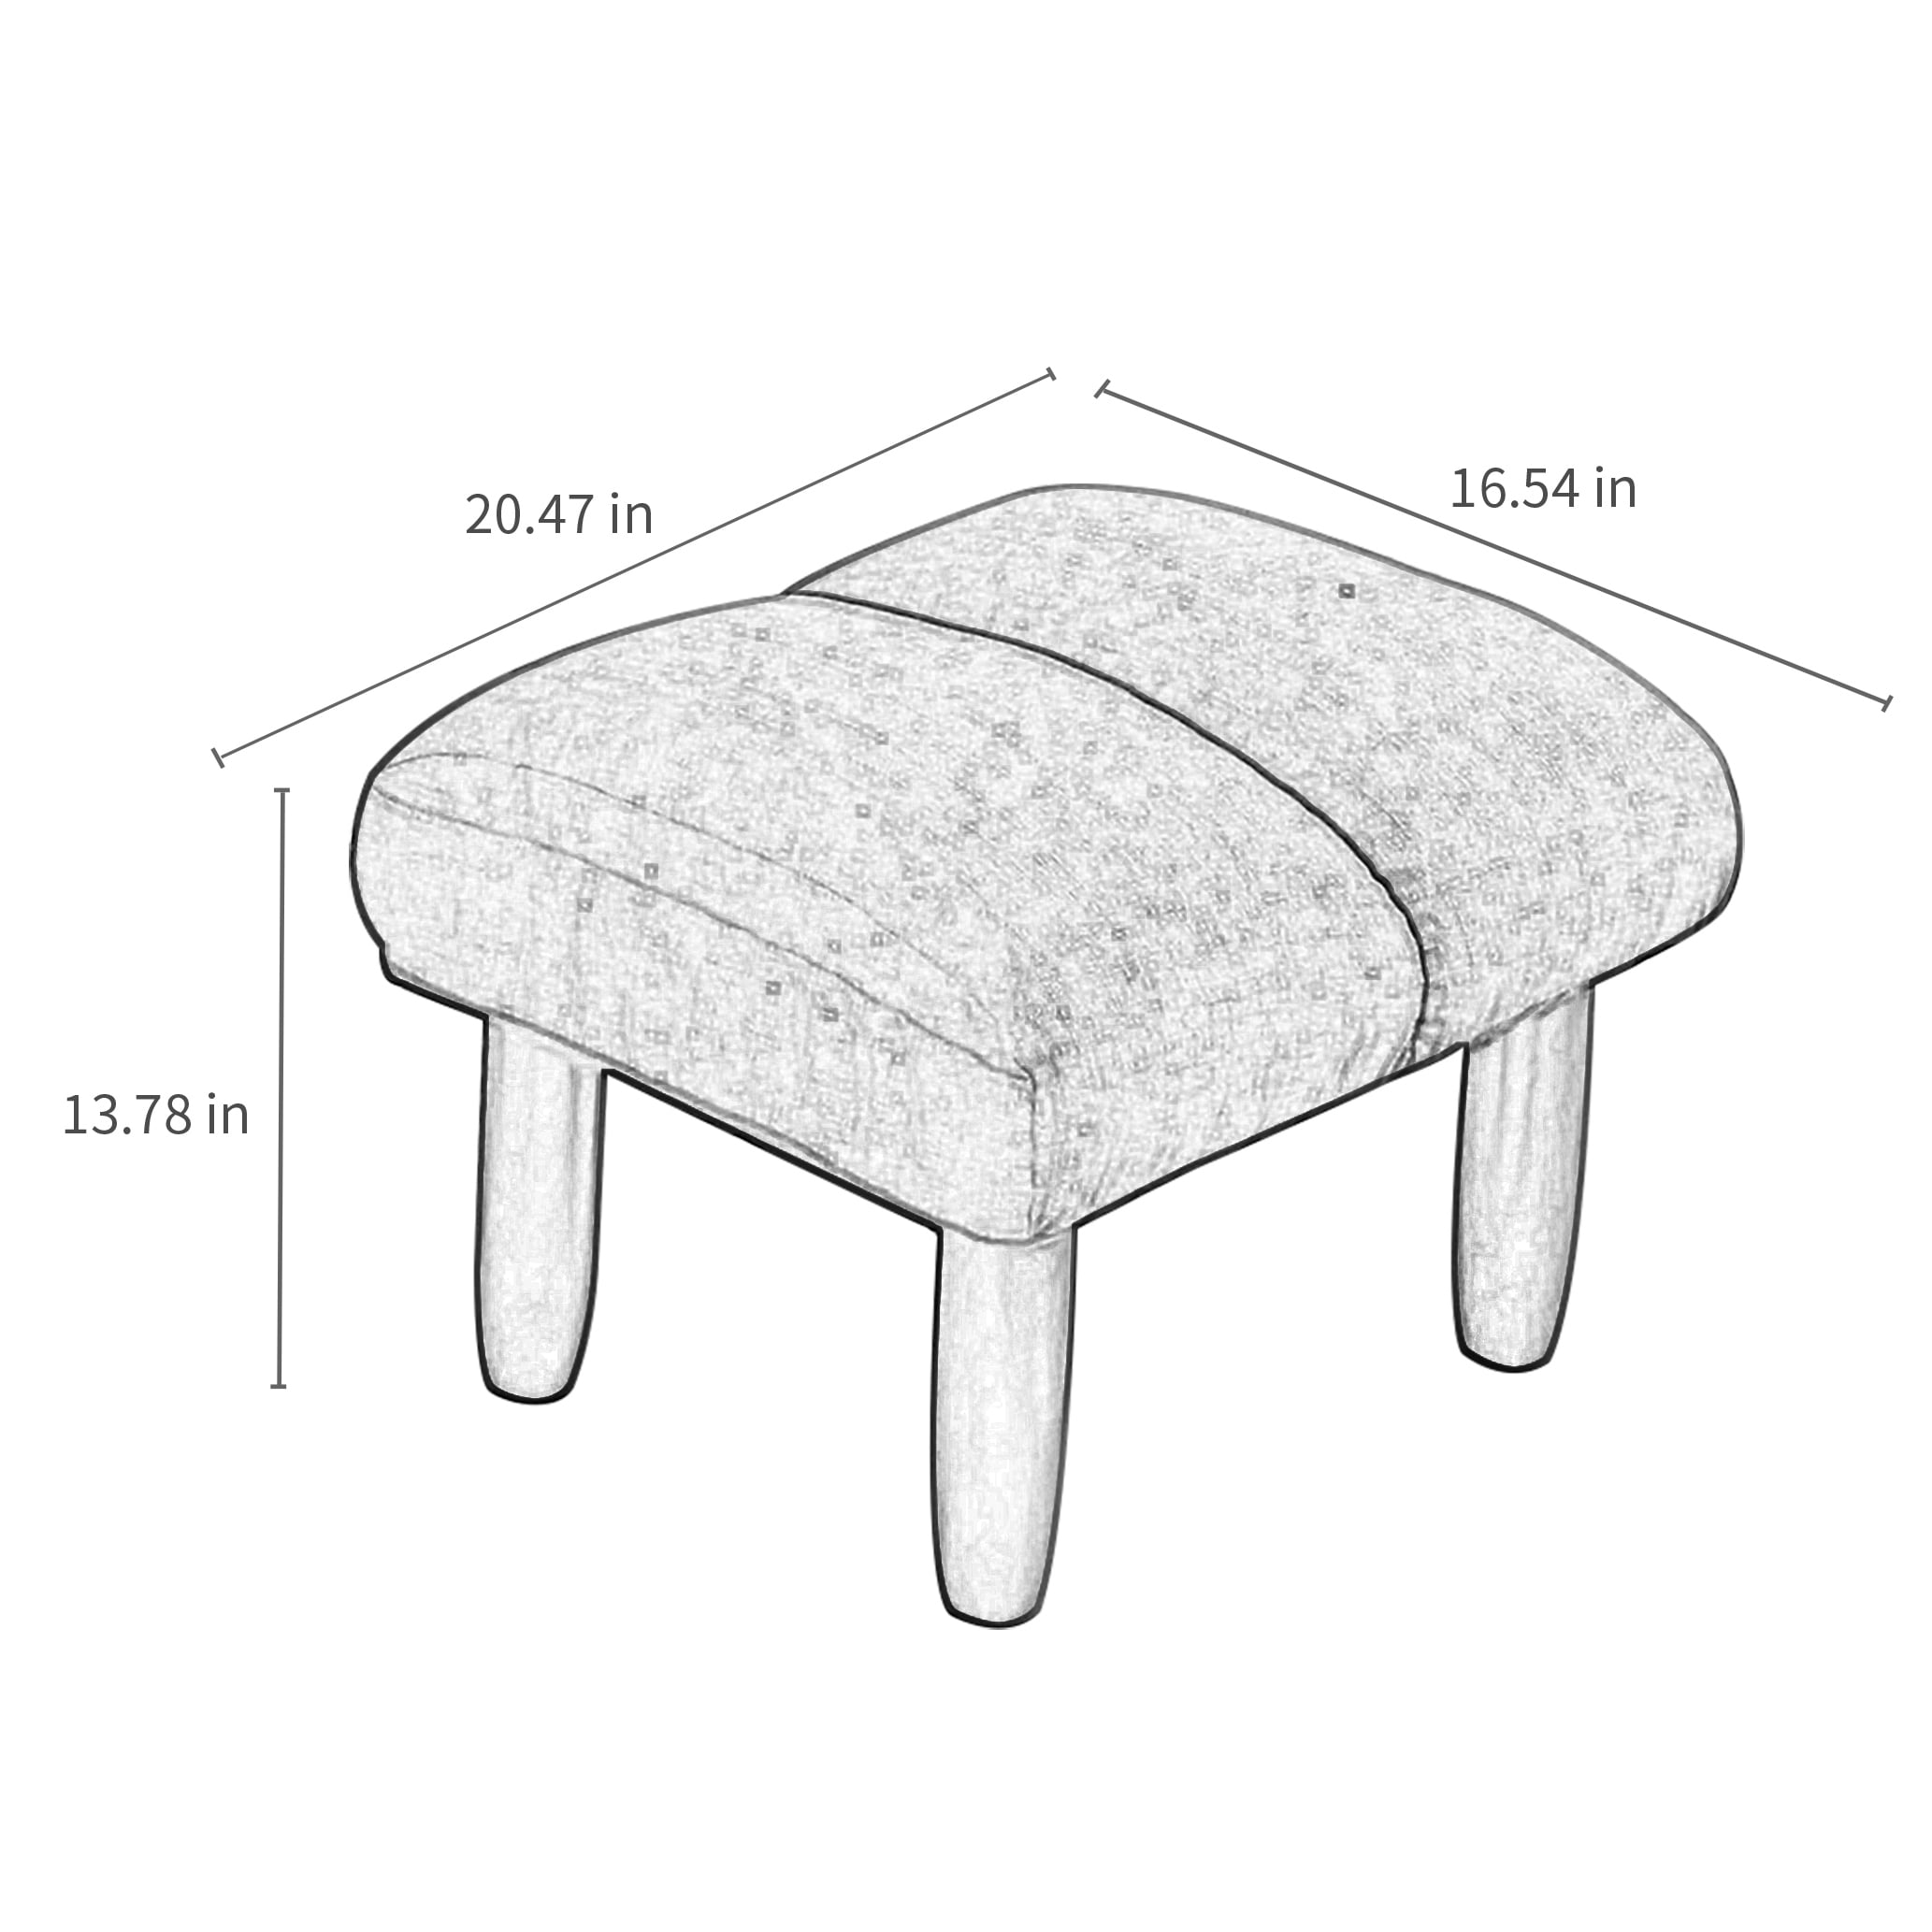  Small Rectangle Foot Stool, PU Linen Fabric Footrest Small  Ottoman Stool with Non-Skid Plastic Legs, Modern Rectangle Footrest Small  Step Stool Ottoman for Couch, Desk, Office, Living Room, Beige : Office